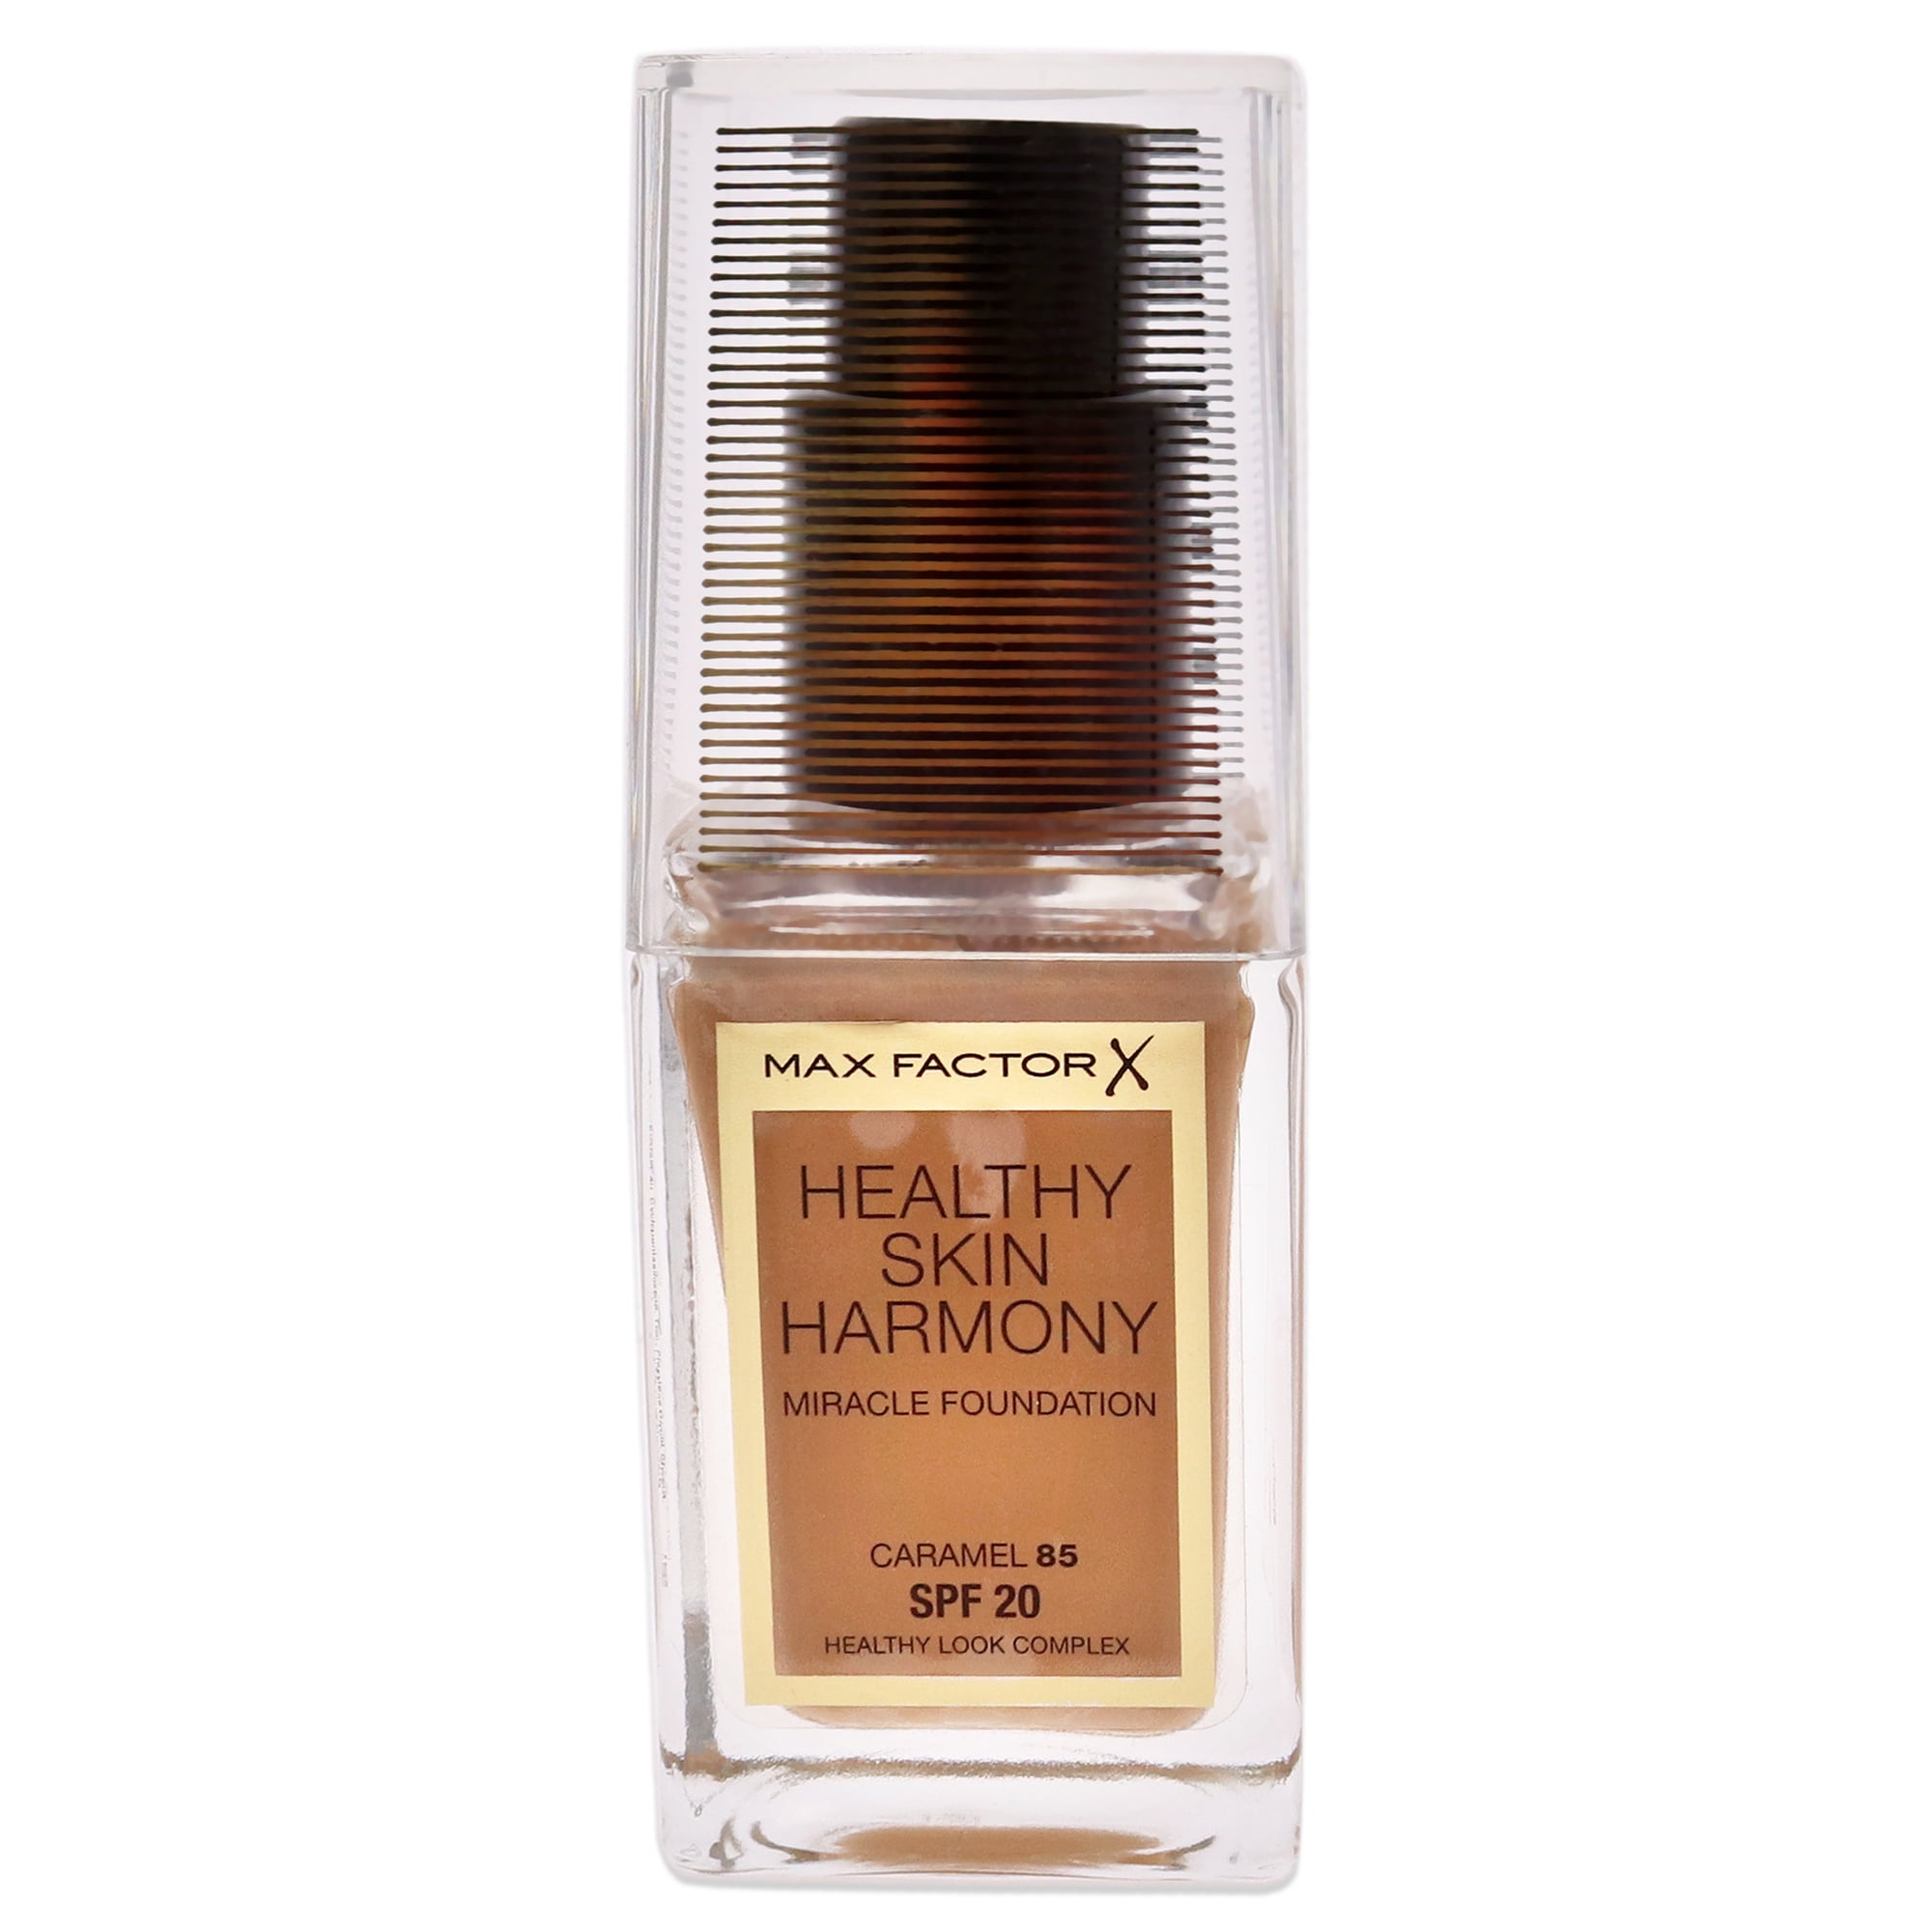 Max Factor Healthy Skin Harmony Foundation - - 20 Foundation Pack of Miracle 85 oz 1 SPF Caramel 2